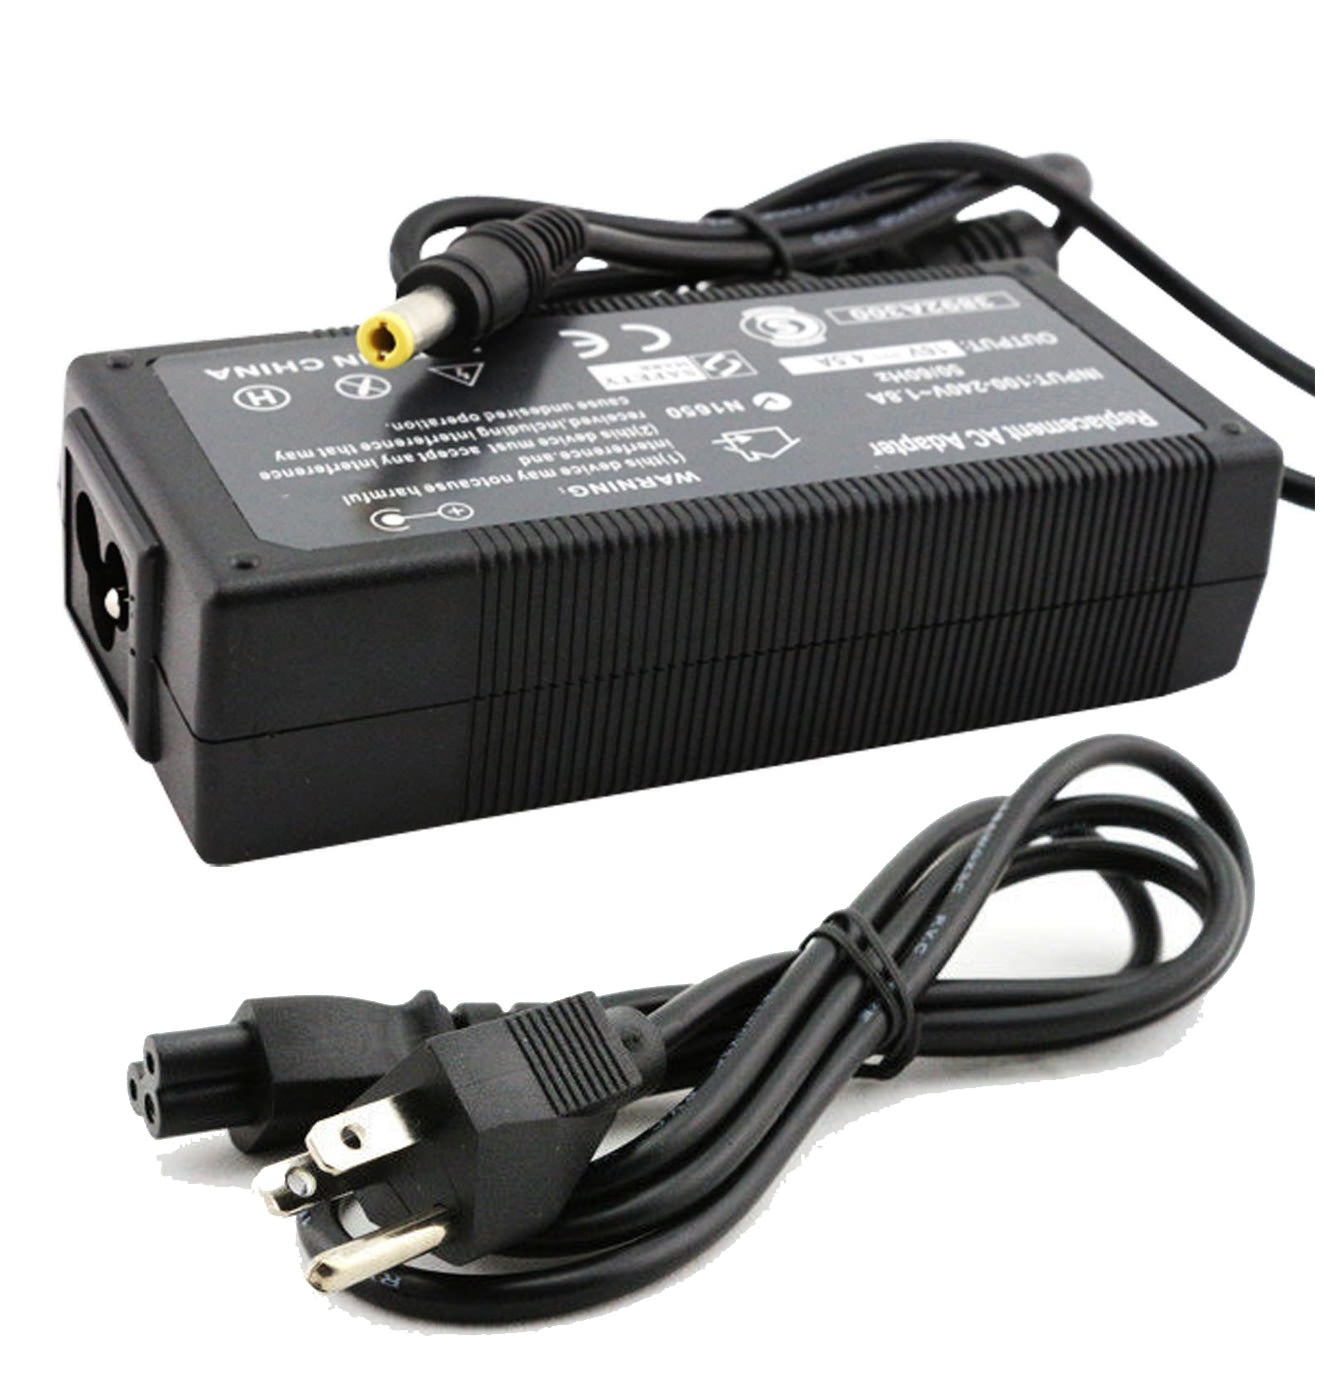 AC Adapter Charger for IBM ThinkPad A20 Notebook.